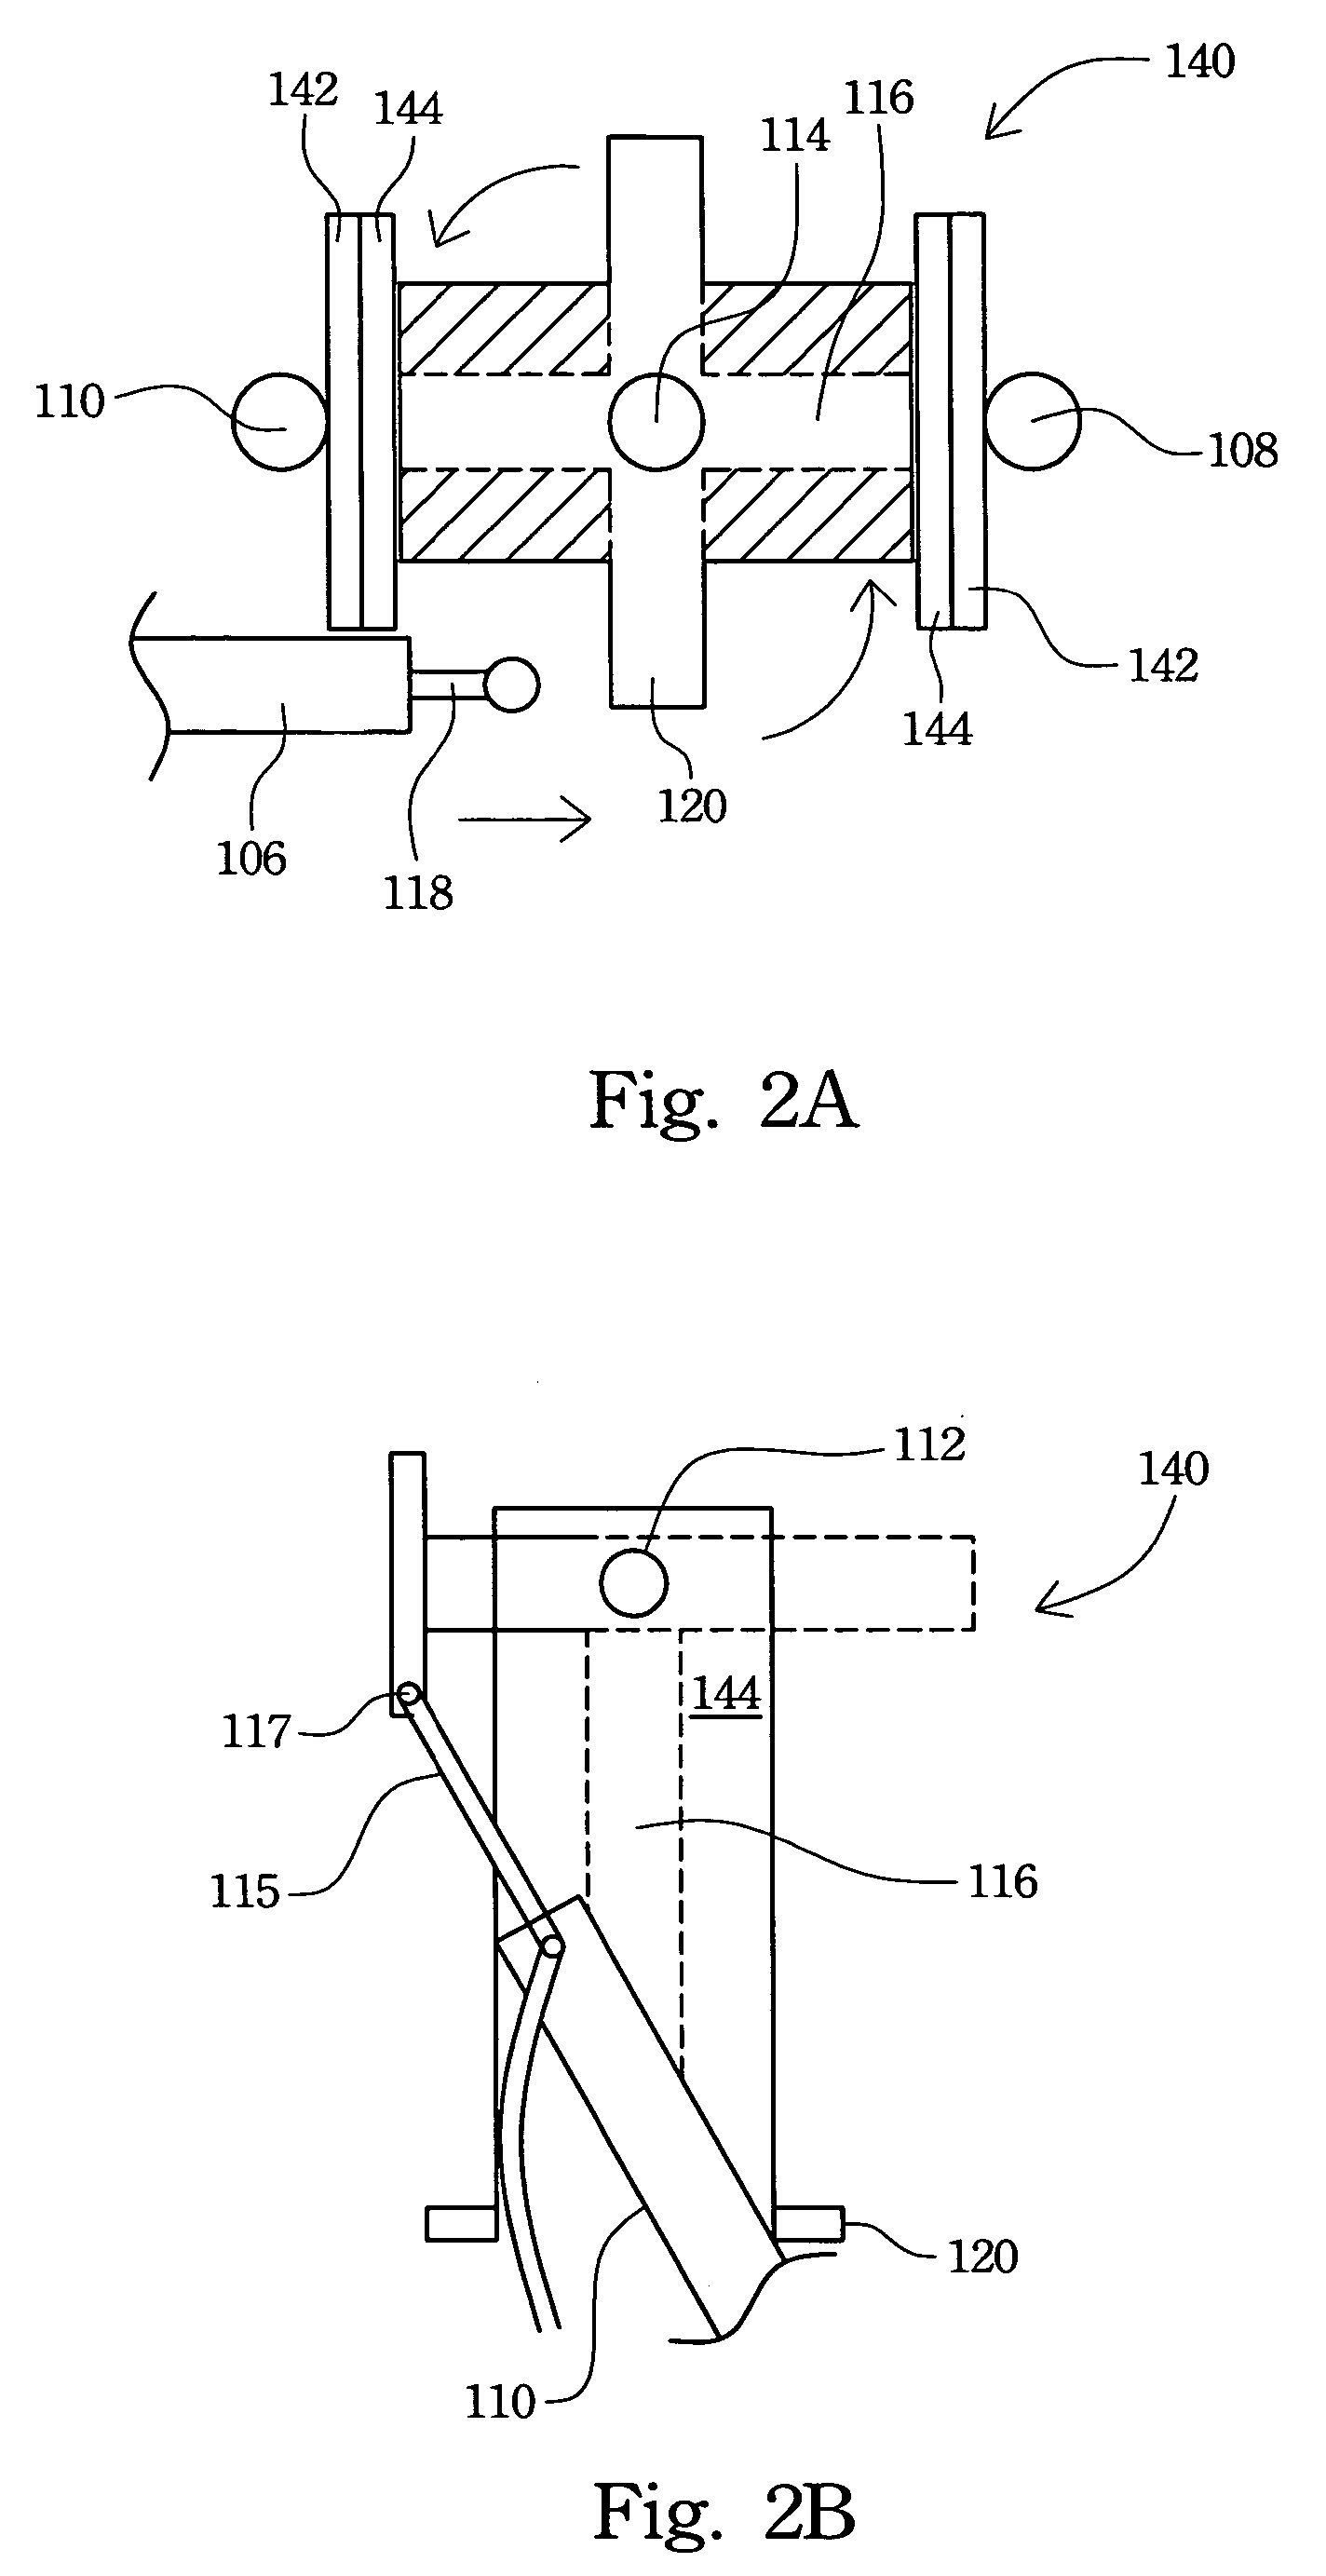 Mobile phone positioning apparatus for radiation testing